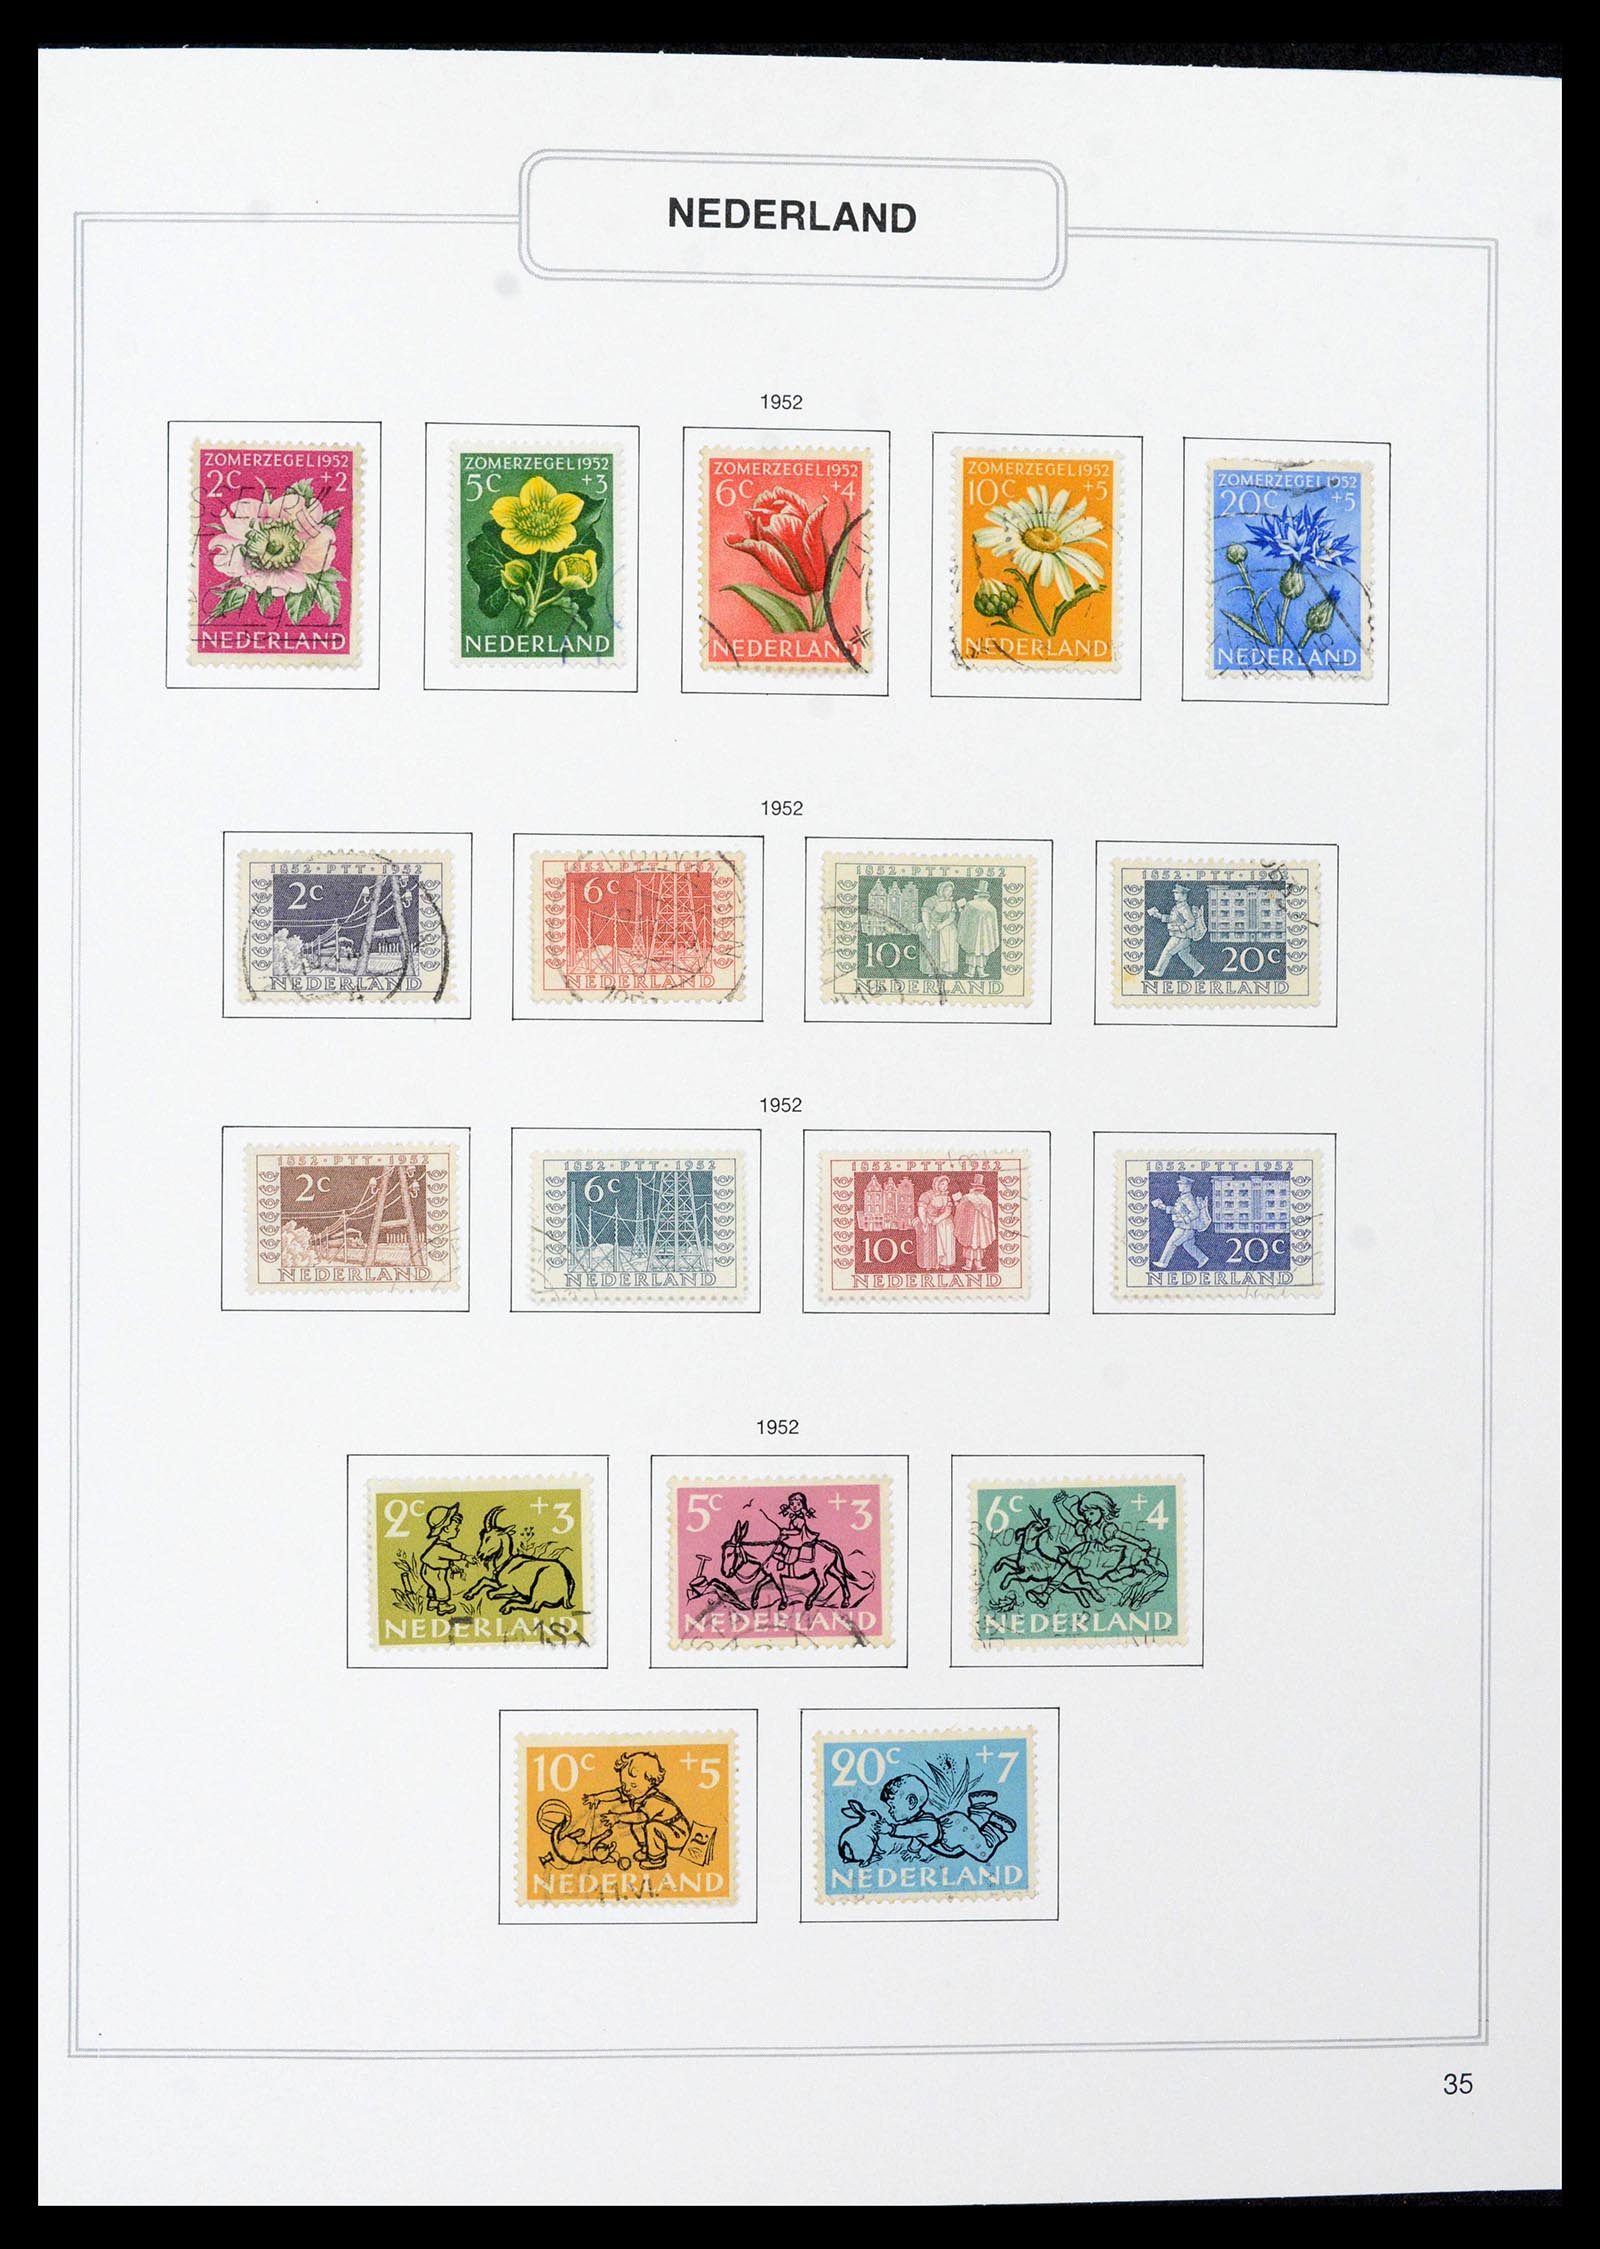 39261 0035 - Stamp collection 39261 Netherlands 1852-2015.